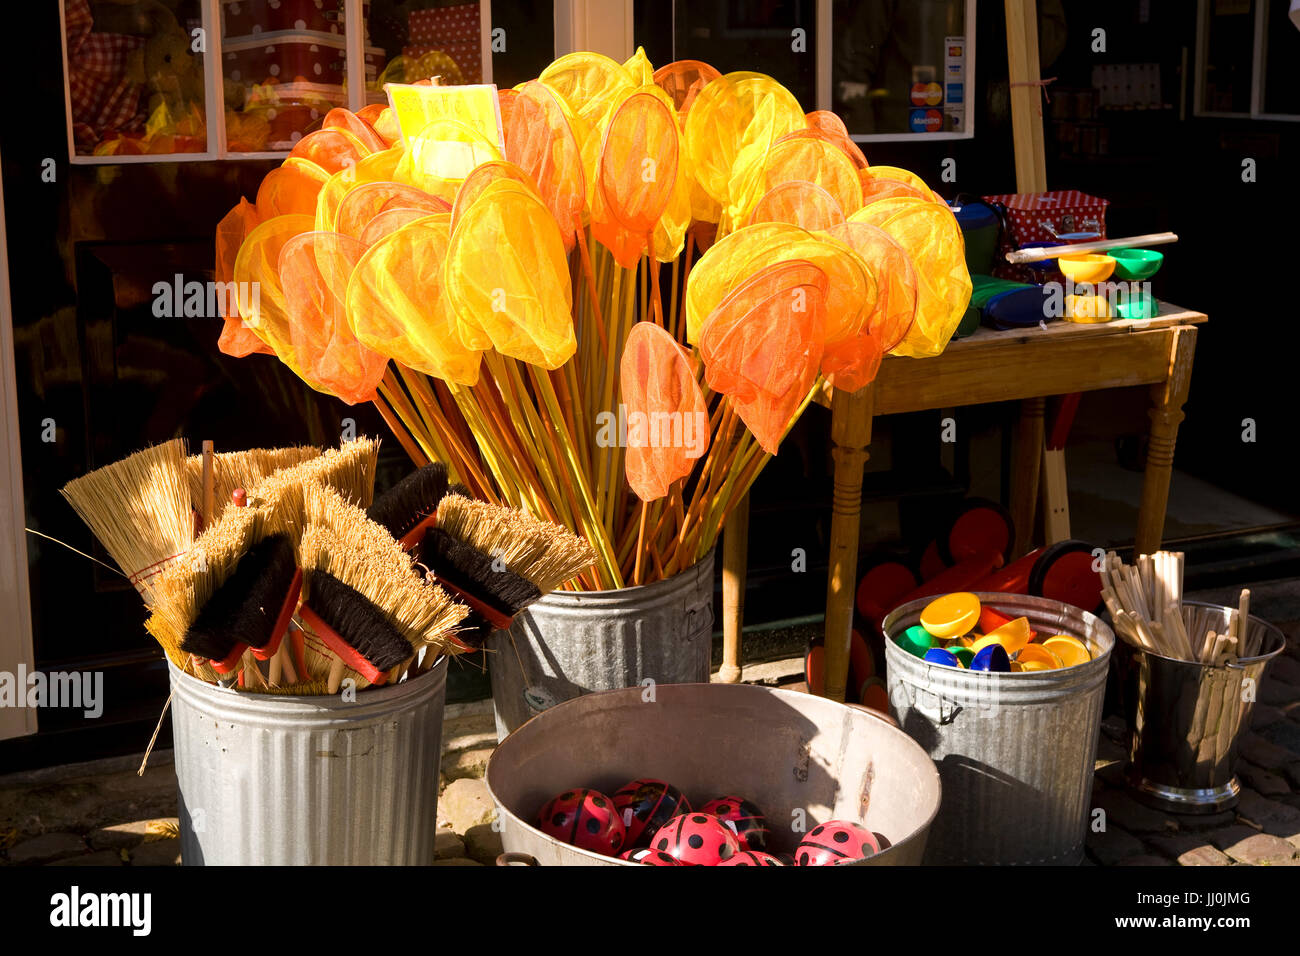 Europe, Netherlands, Zeeland, the village Veere on the peninsula Walcheren, shop at the market place, products on offer, brailer, brooms. Stock Photo